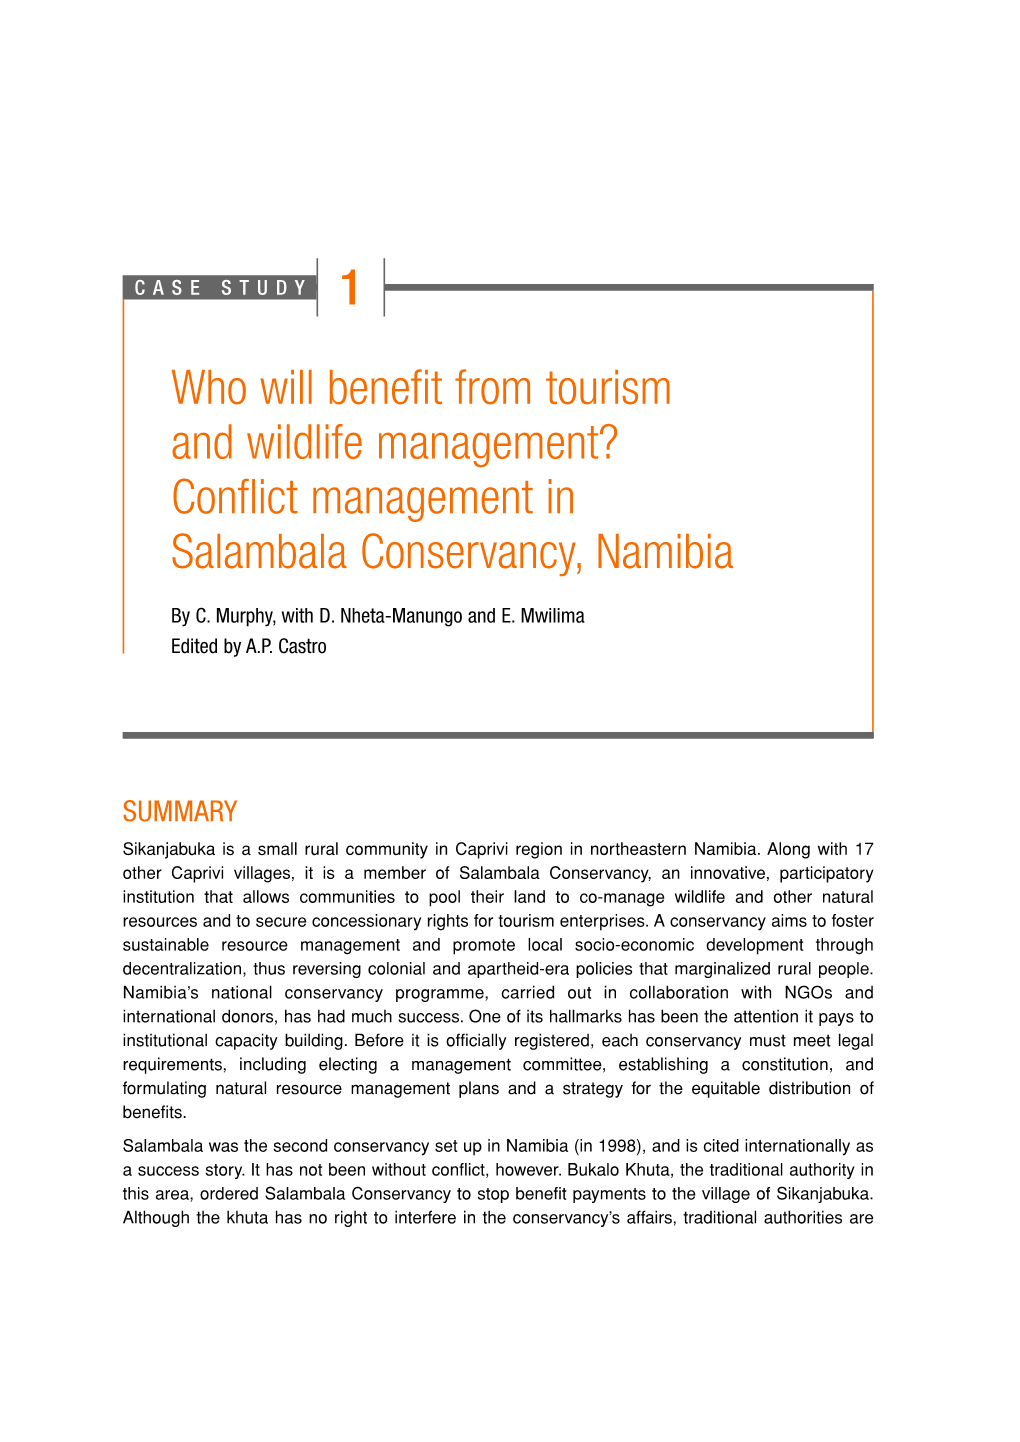 Conflict Management in Salambala Conservancy, Namibia